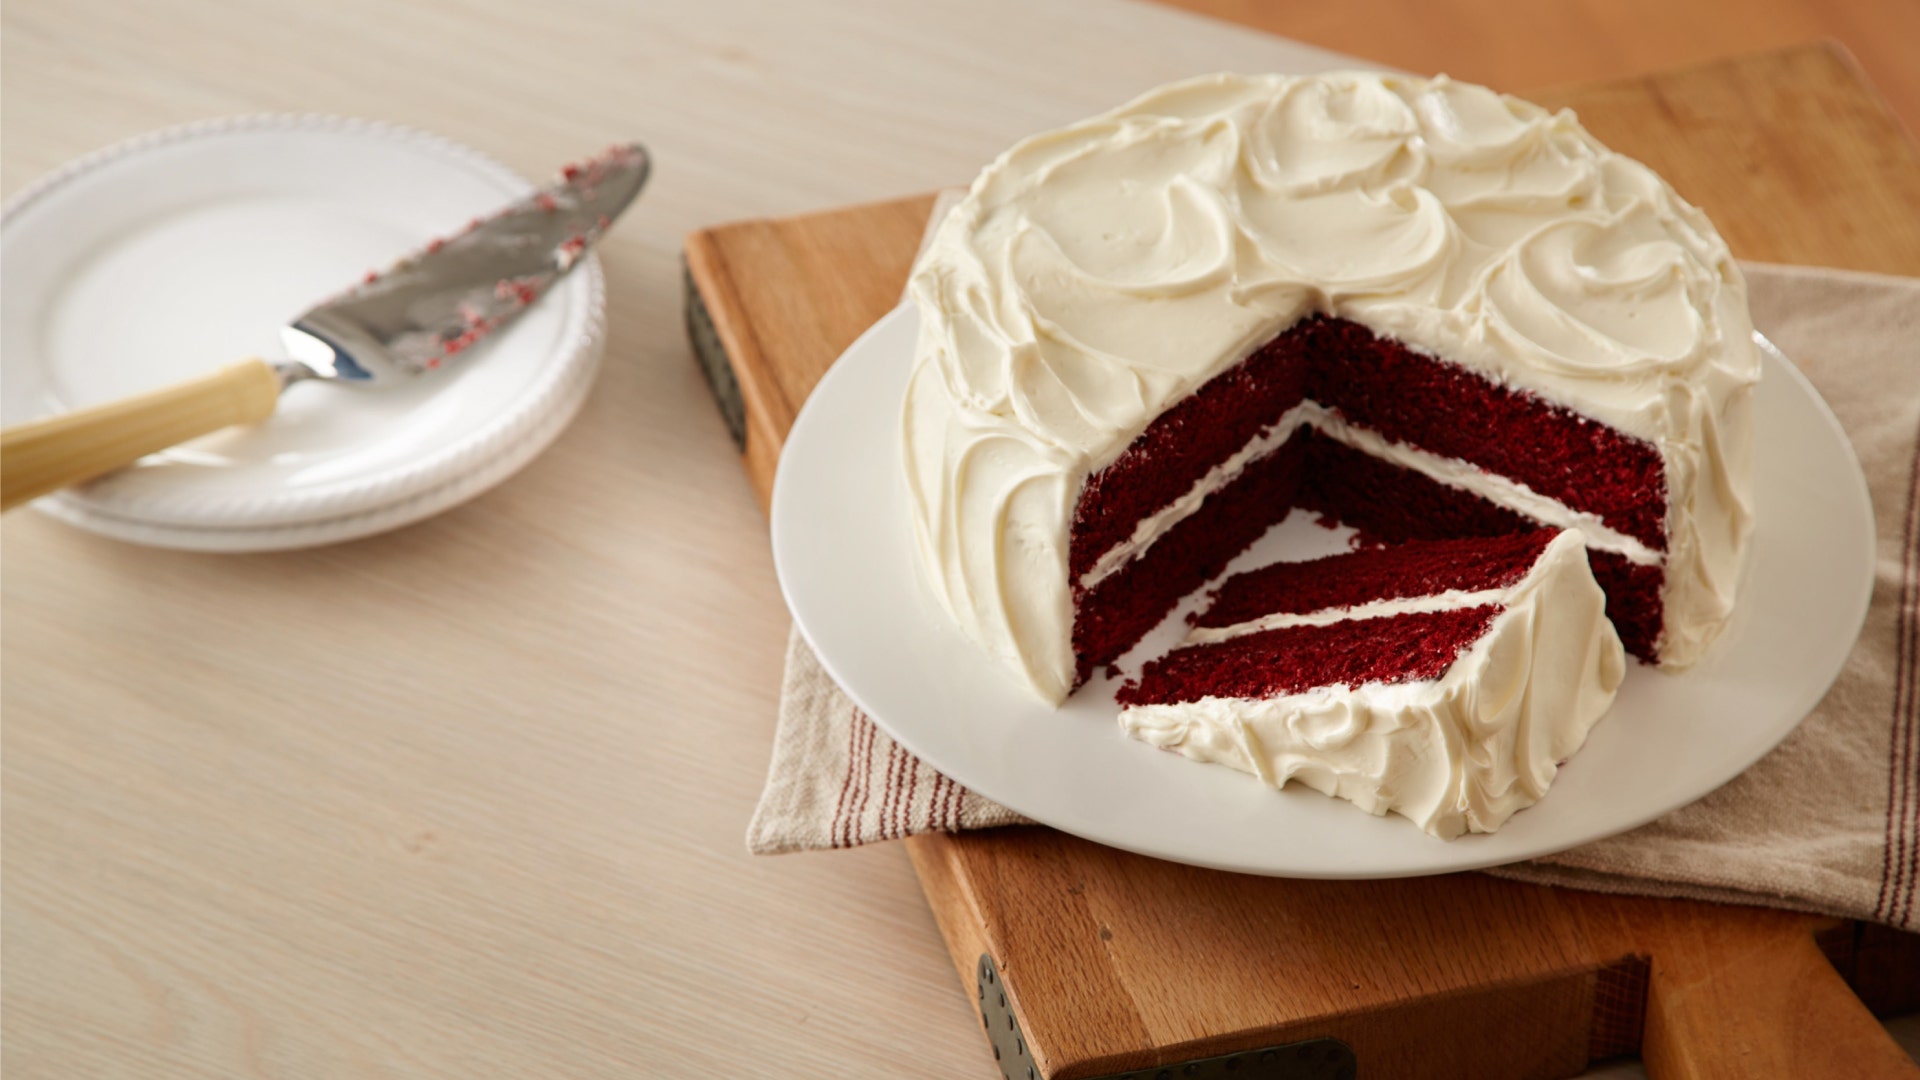 Eggless Red Velvet Cake | Movers and Bakers